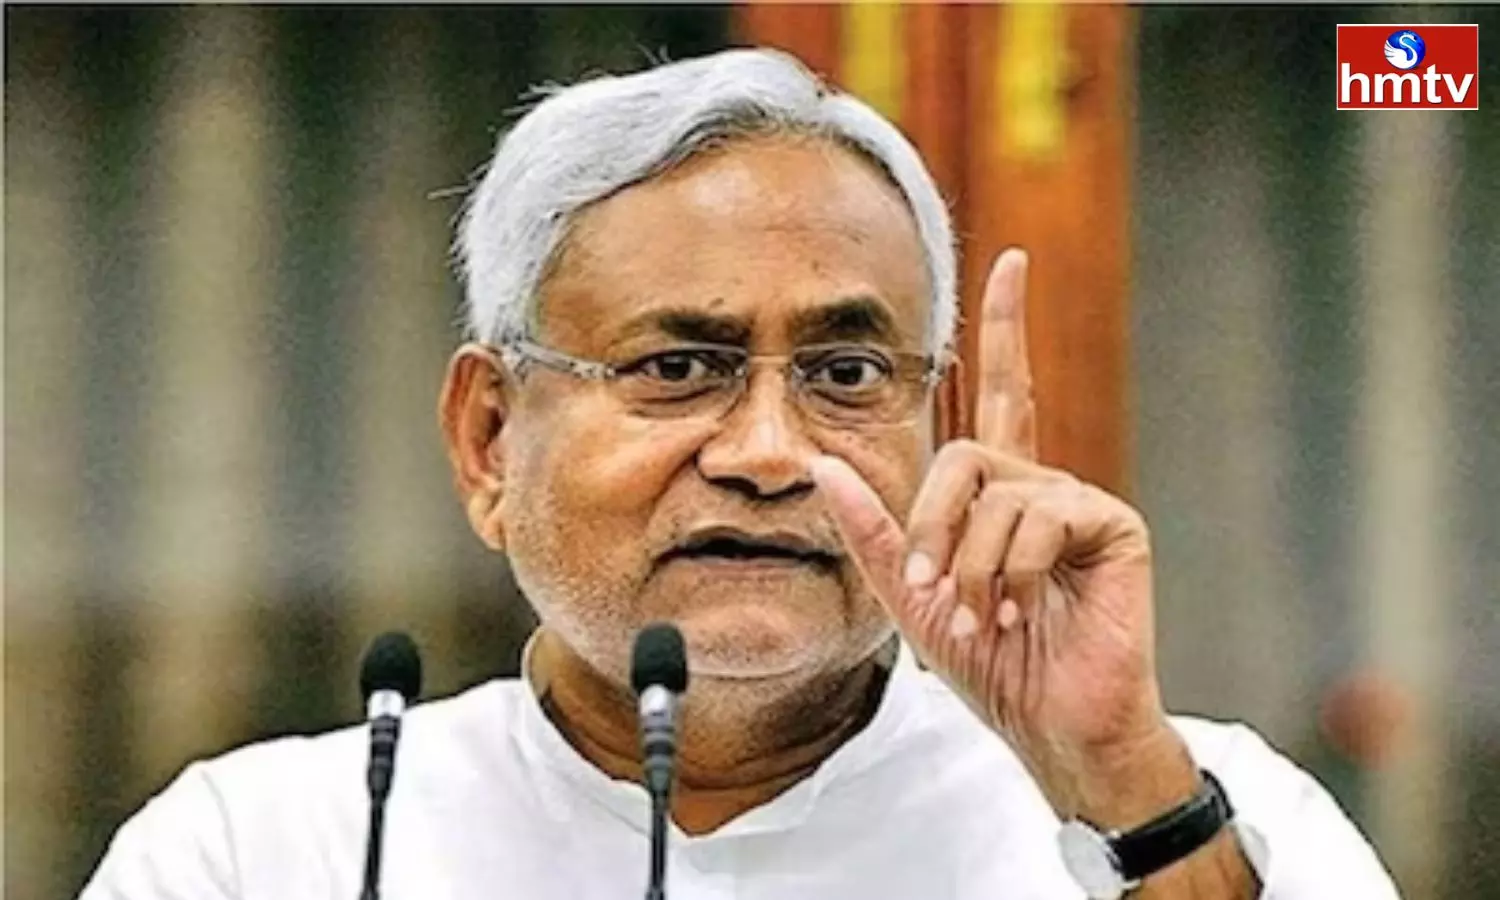 Today there are chances of Nitish Kumar Resigning from the post of CM